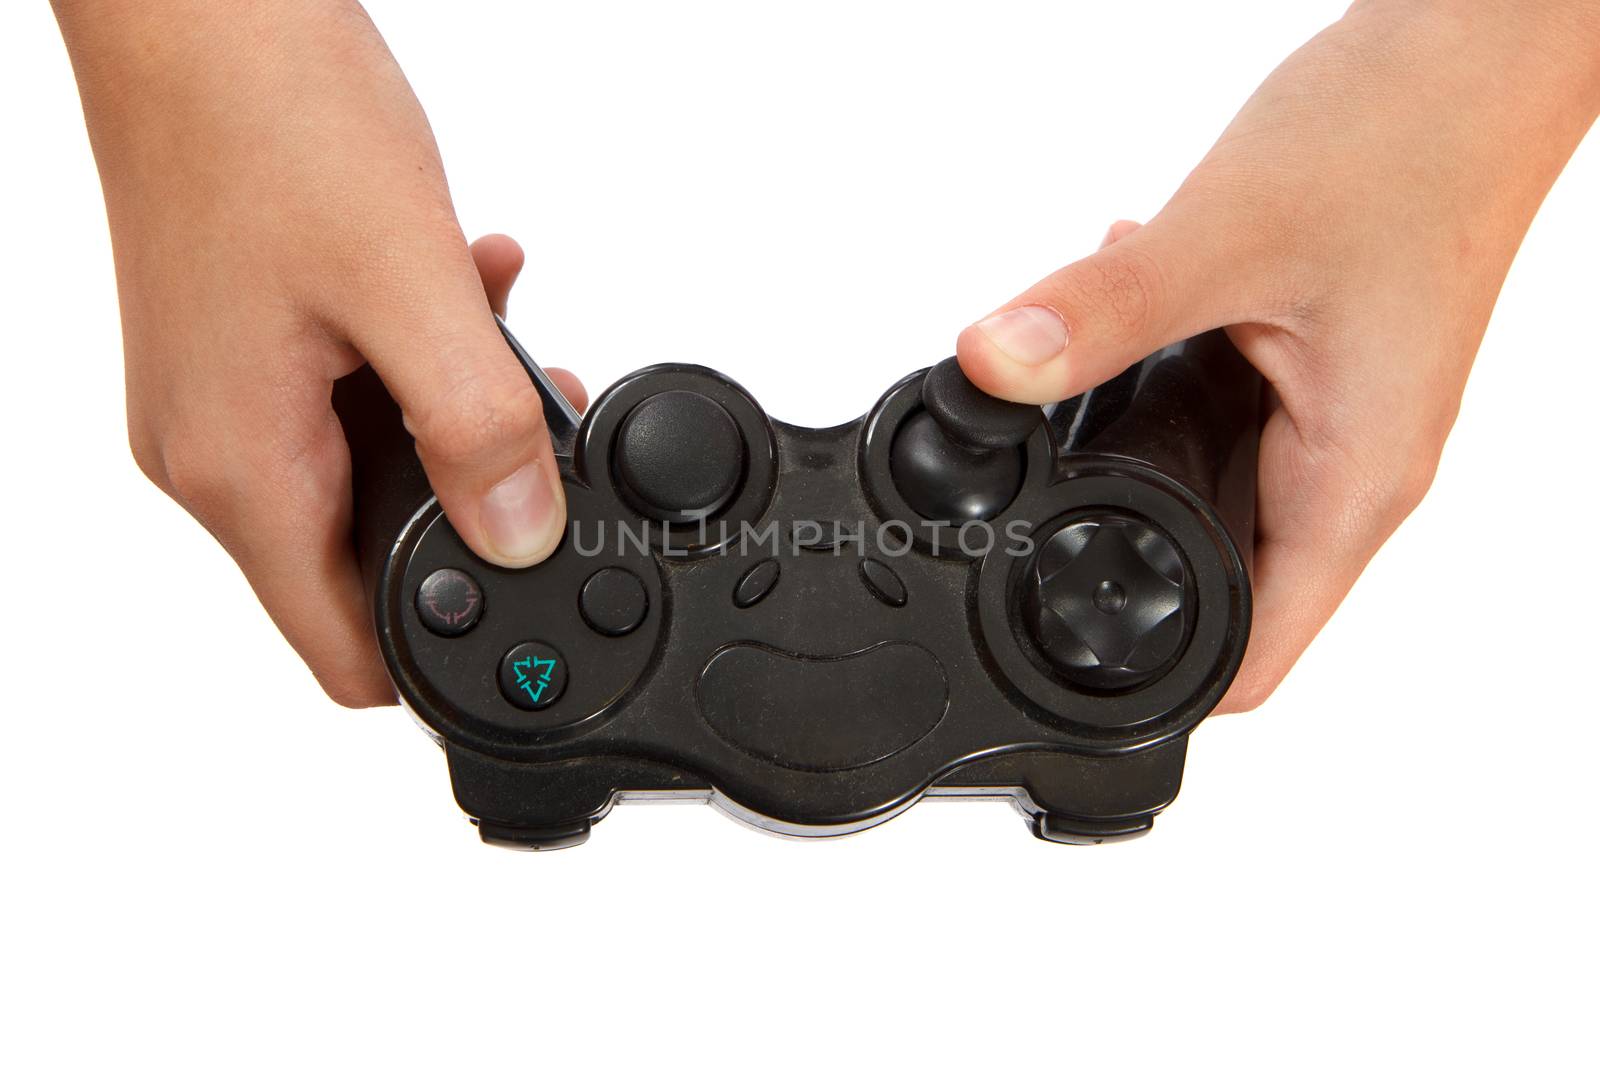 A black video game console controller being used